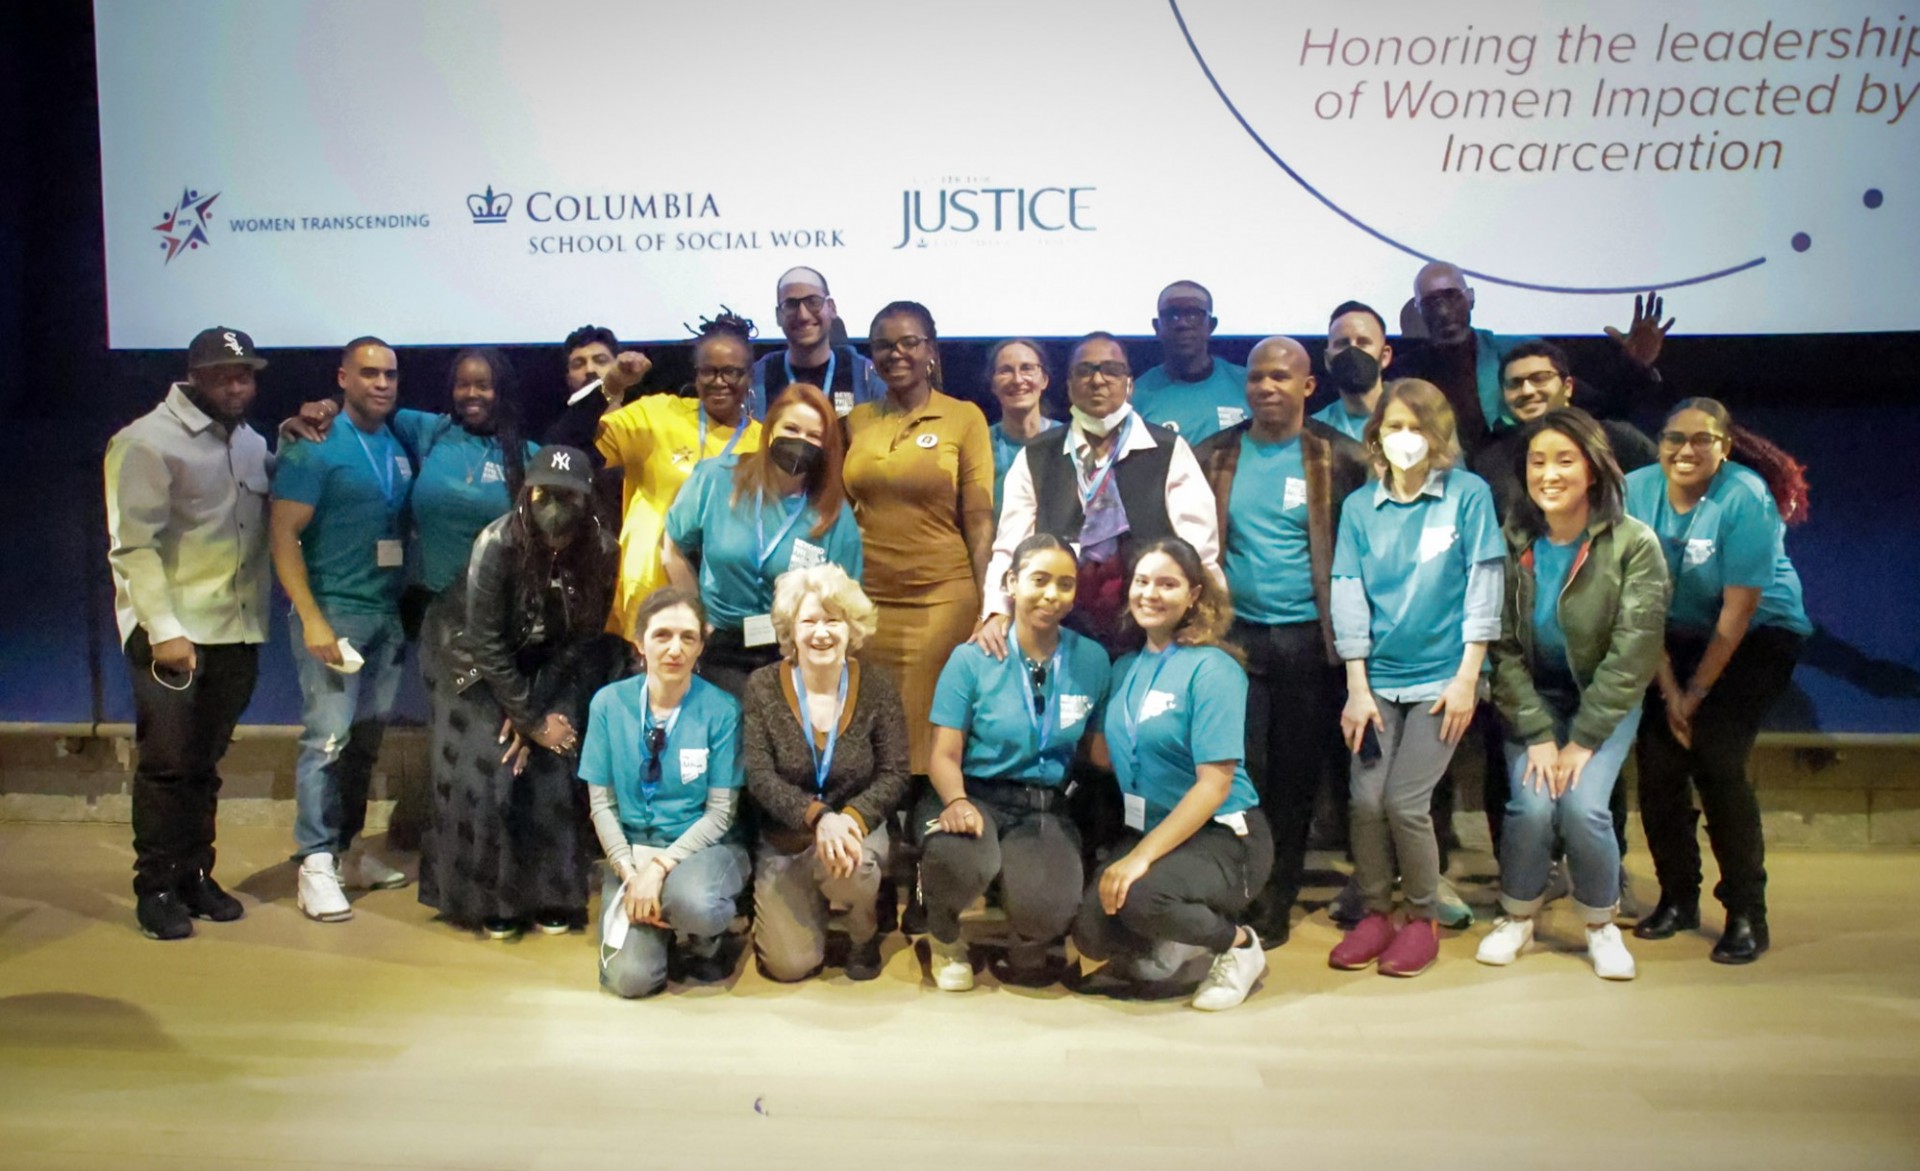 Group photo of the Center for Justice staff